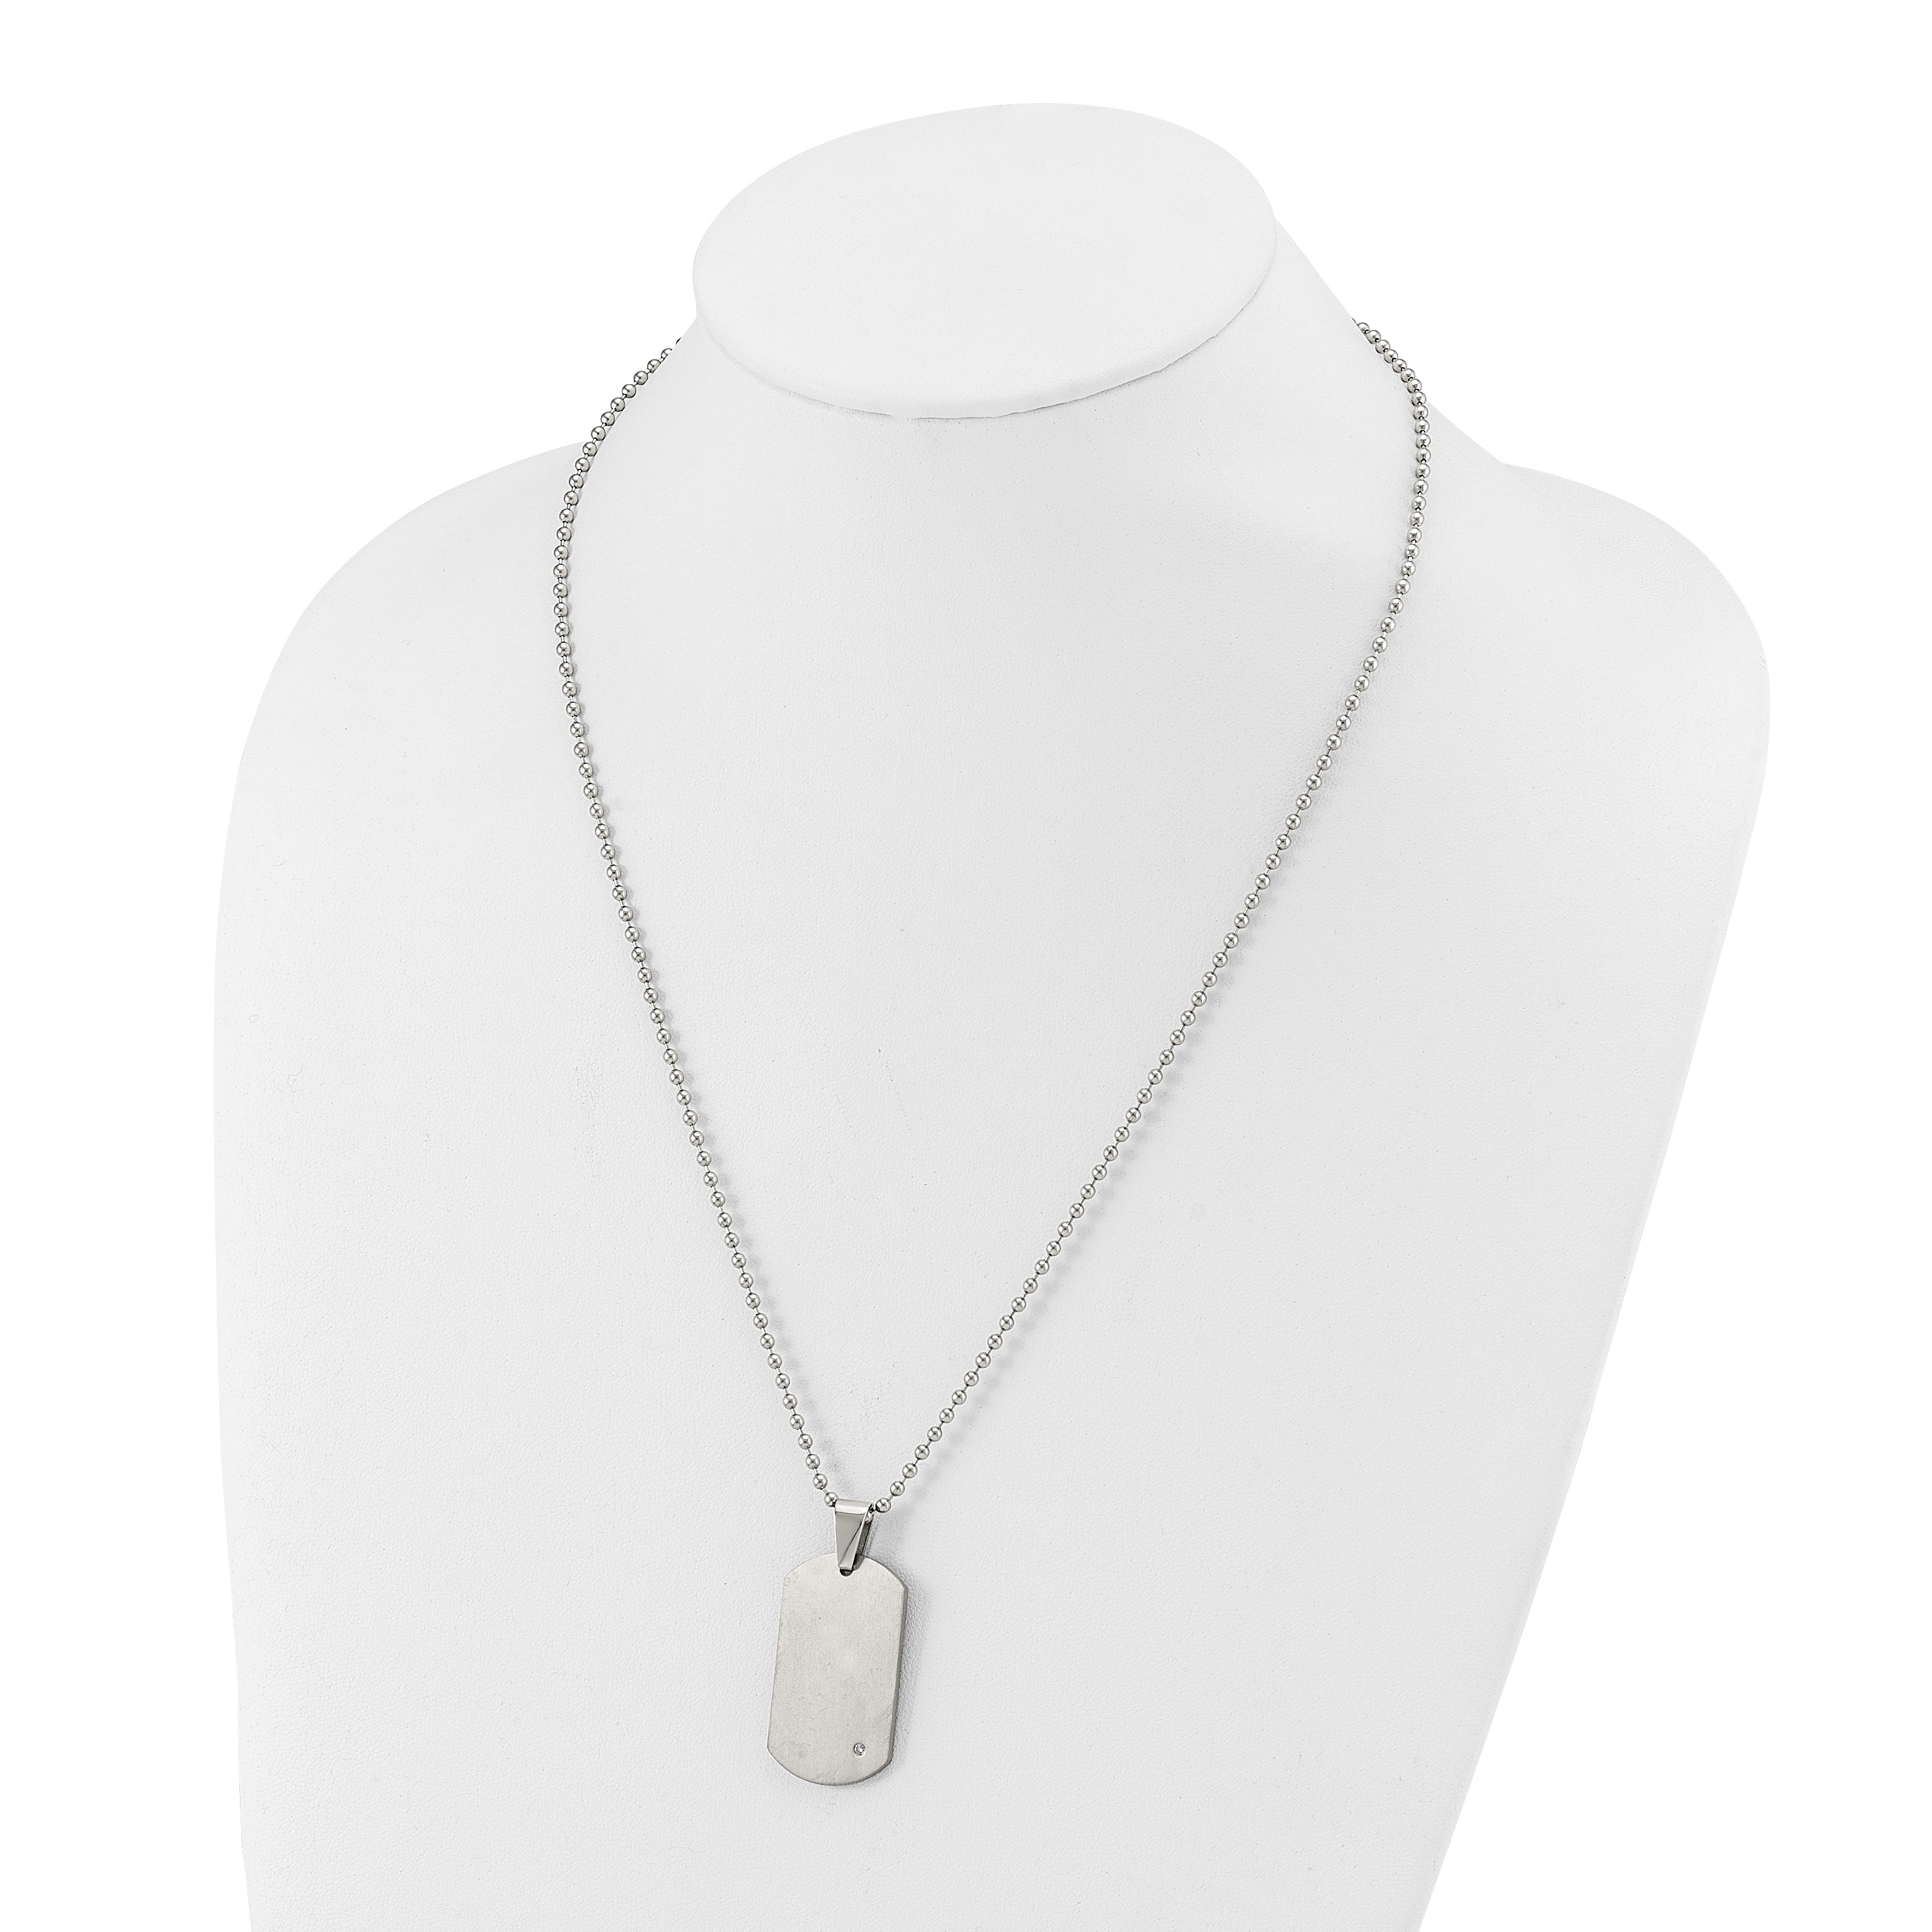 Chisel Titanium Brushed with .02 carat Diamond Accent Dog Tag 22 inch Necklace